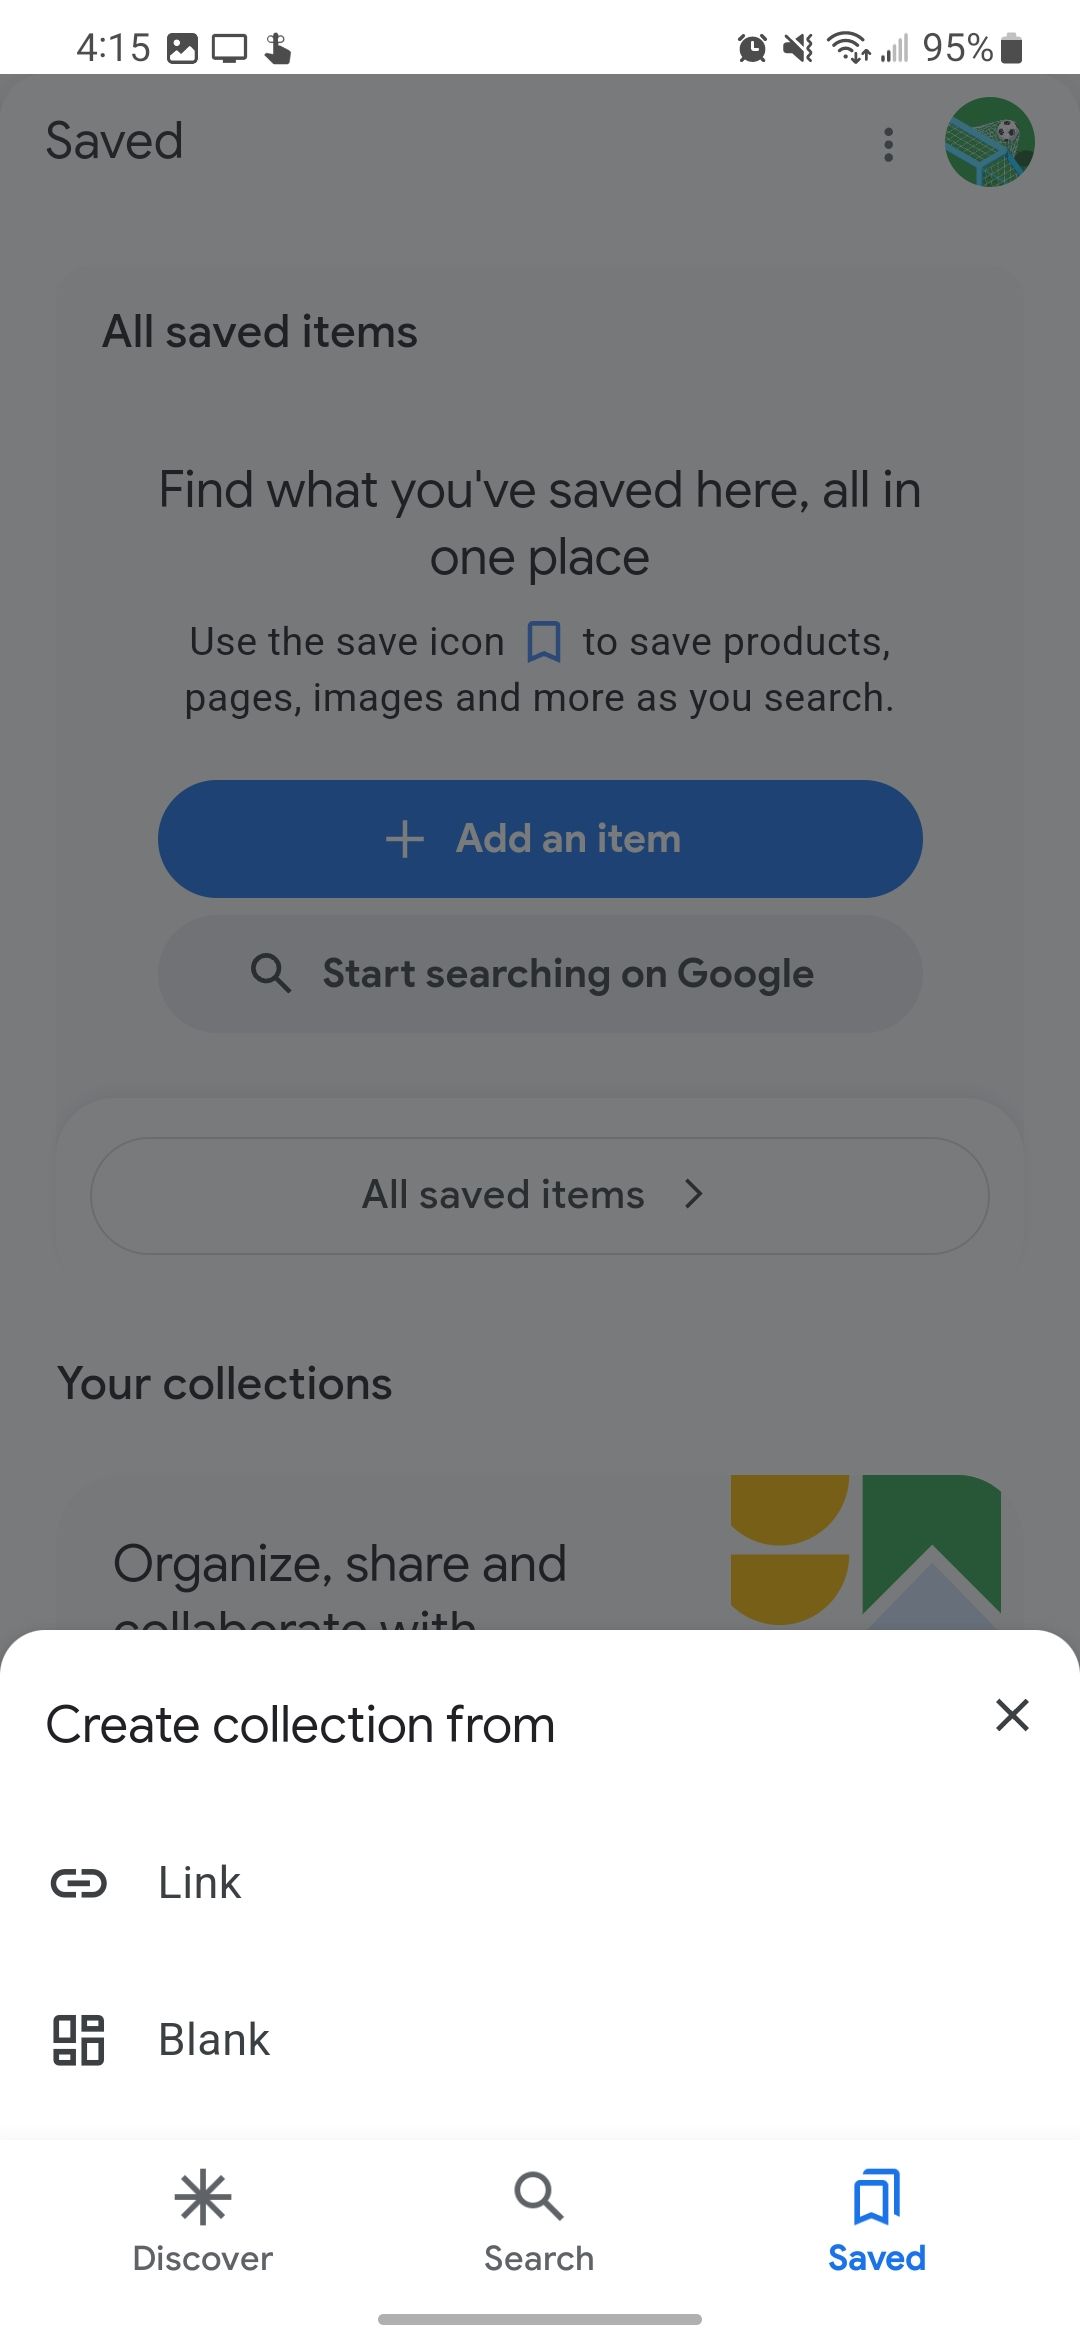 The "Create collection from" pop up giving you the option to create a collection from a link or create a blank collection in the Google app